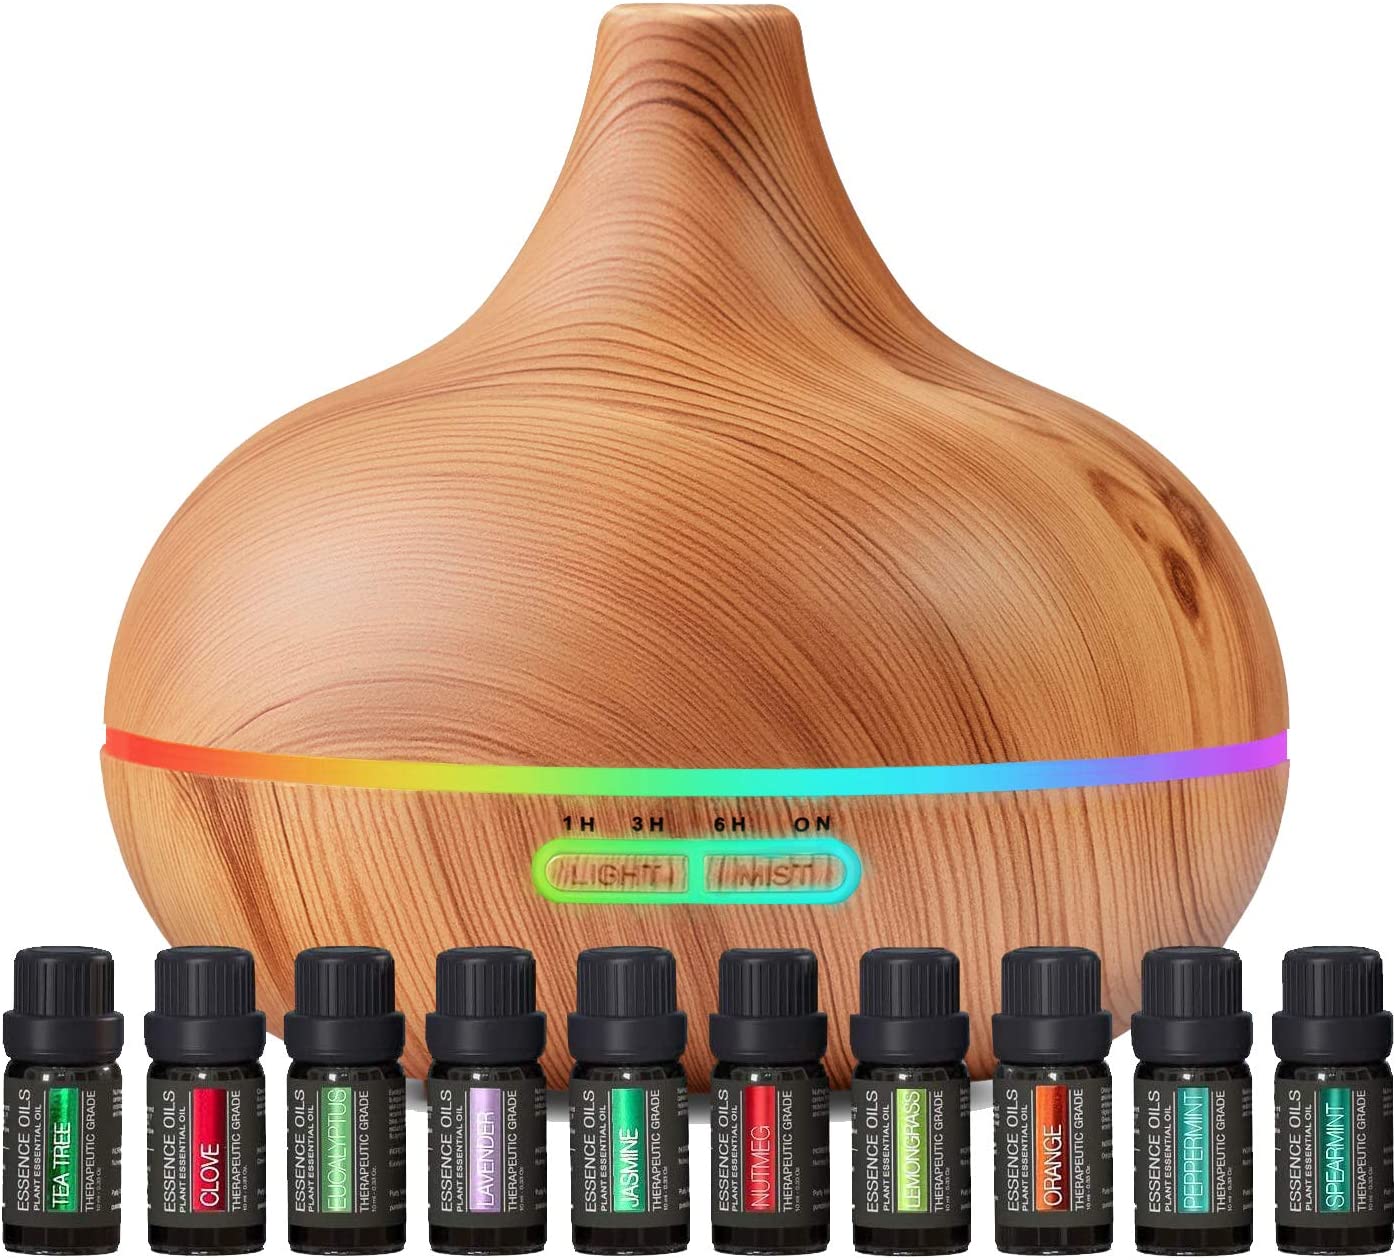  Pure Daily Care Aromatherapy Top 10 Essential Oil Set